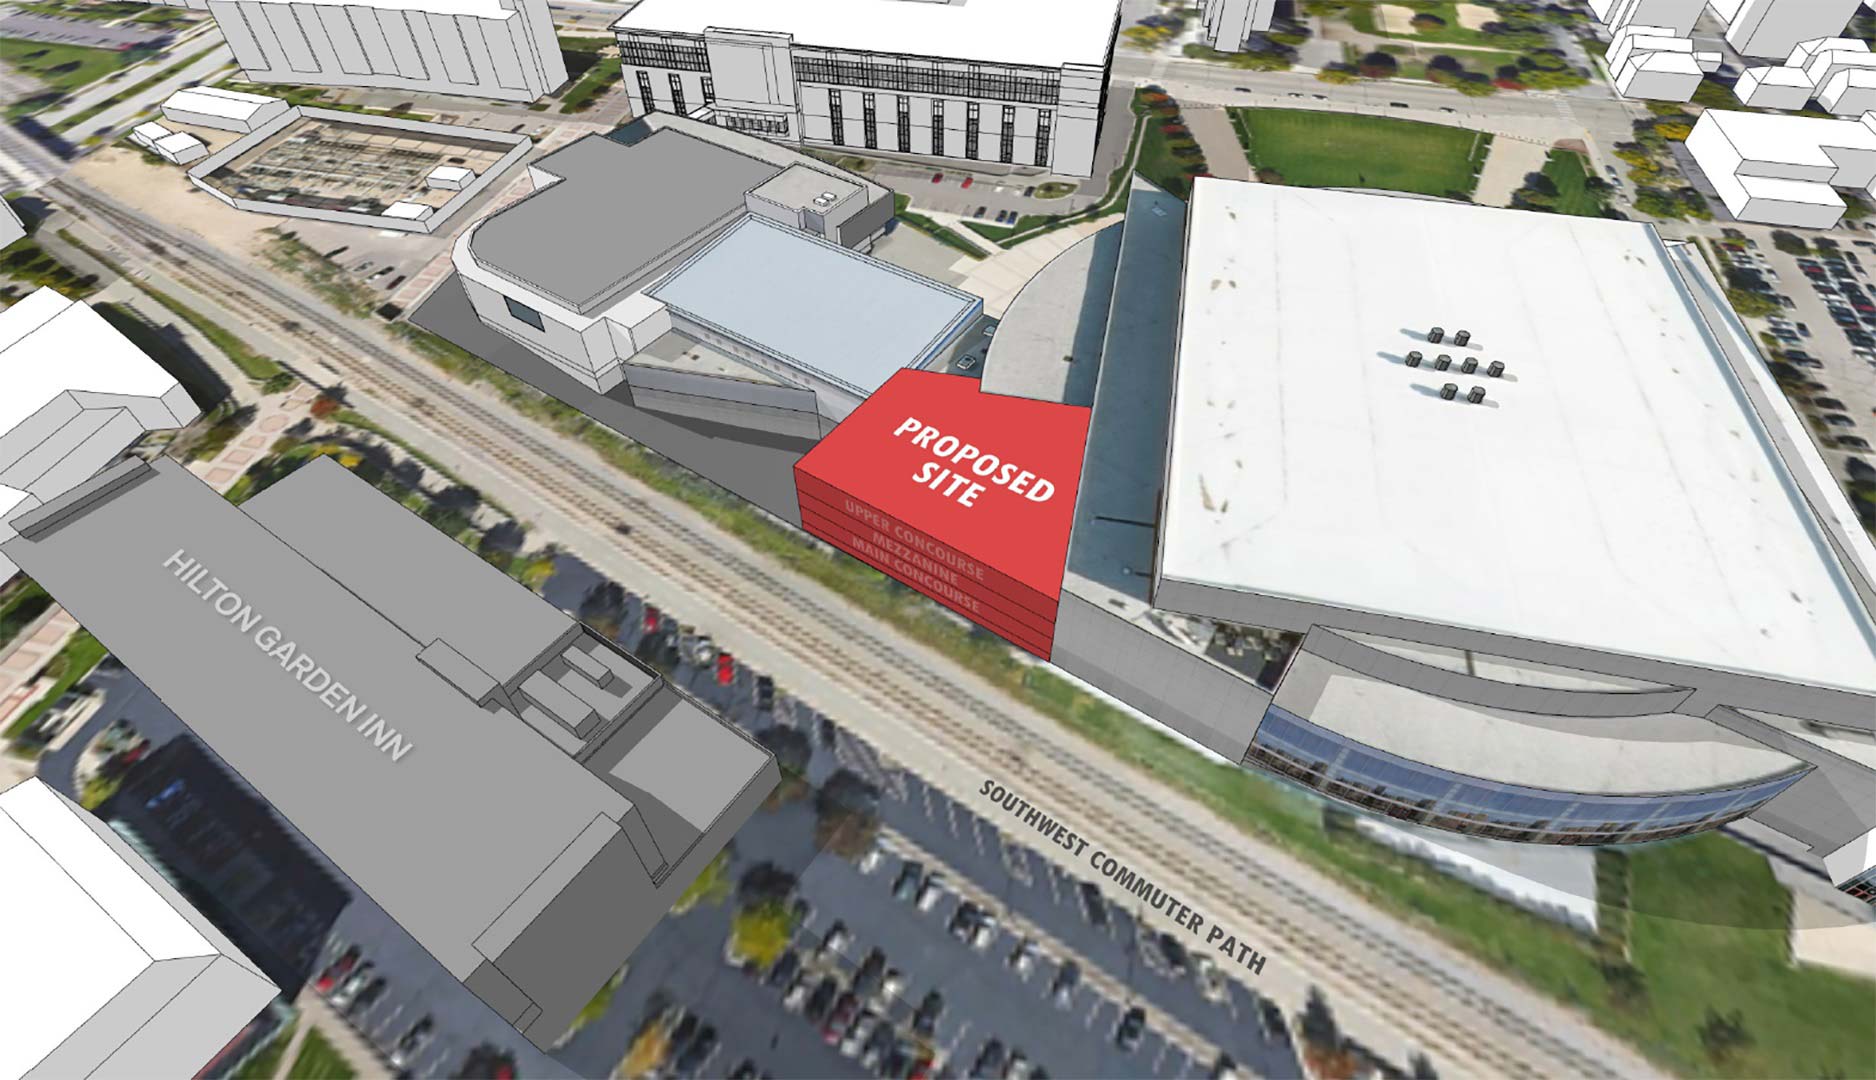 A rendering view from the sky overhead of the proposed building site. It shows the existing buildings that are part of the Kohl Center complex as well as the surrounding business and other university buildings.